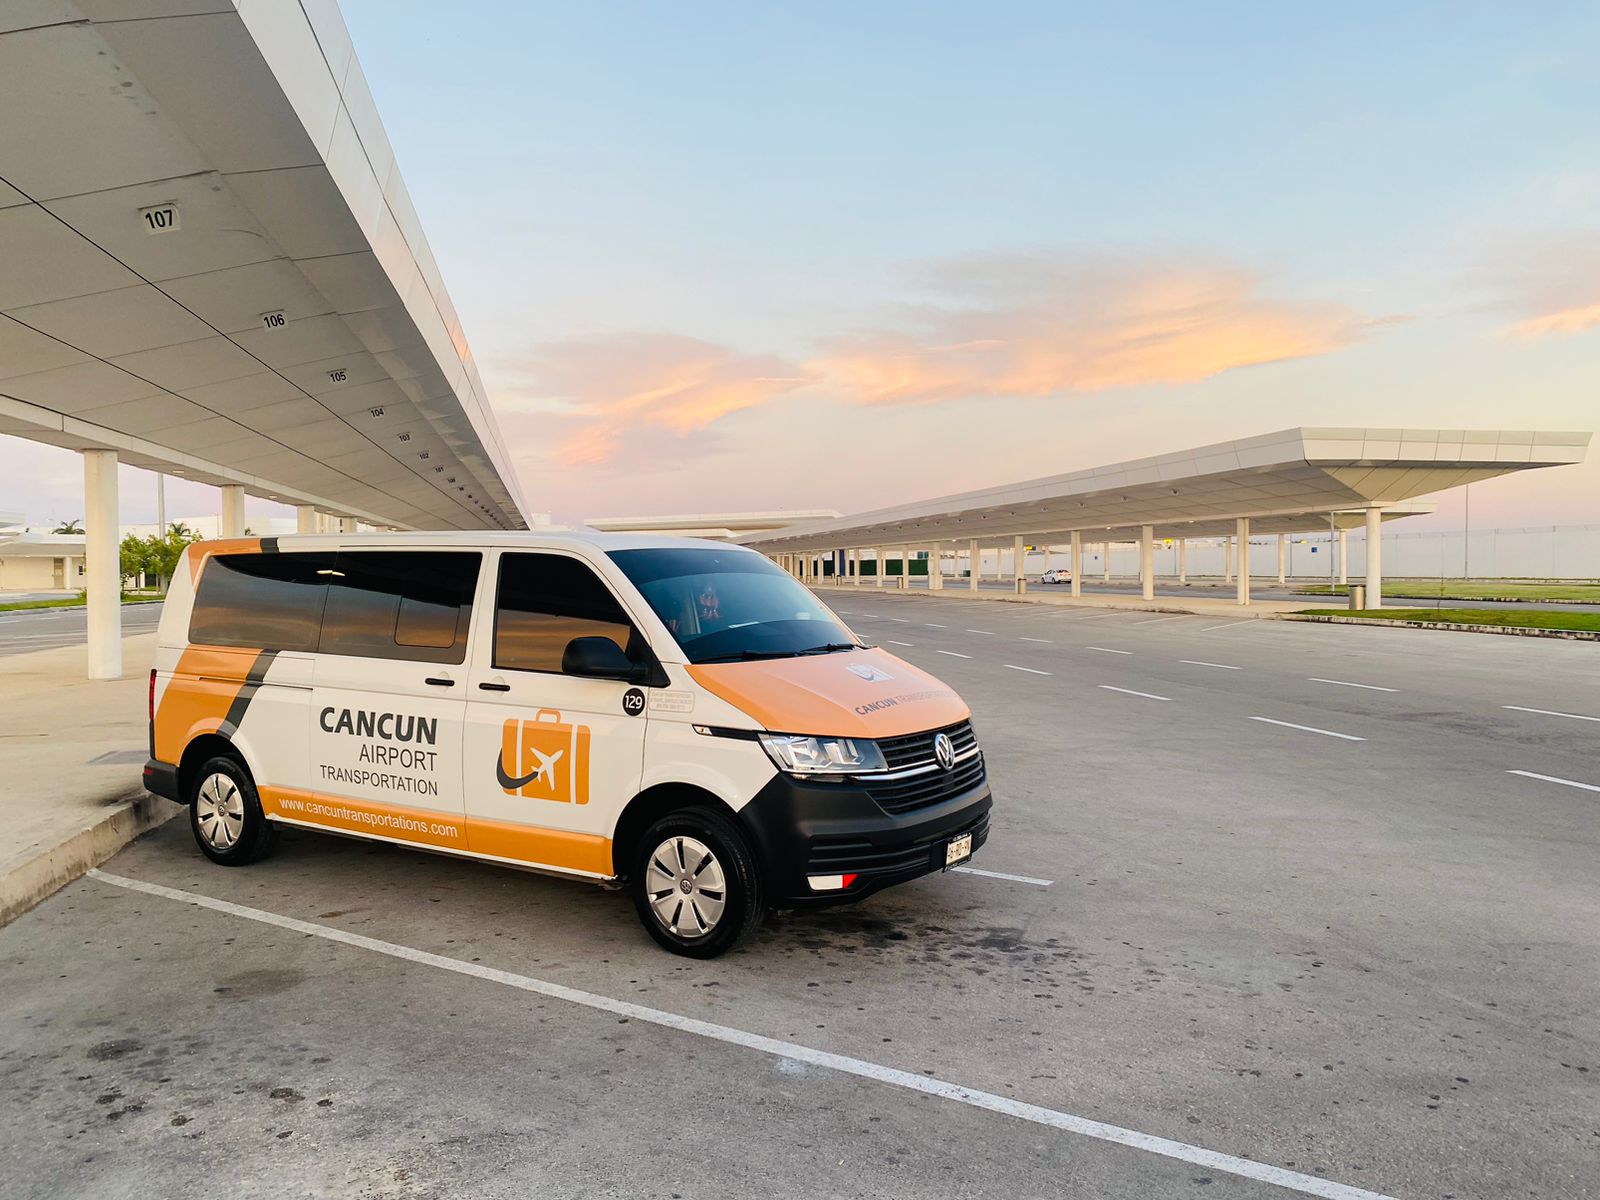 Cancun Airport Transportation - What to know before you go to Cancun